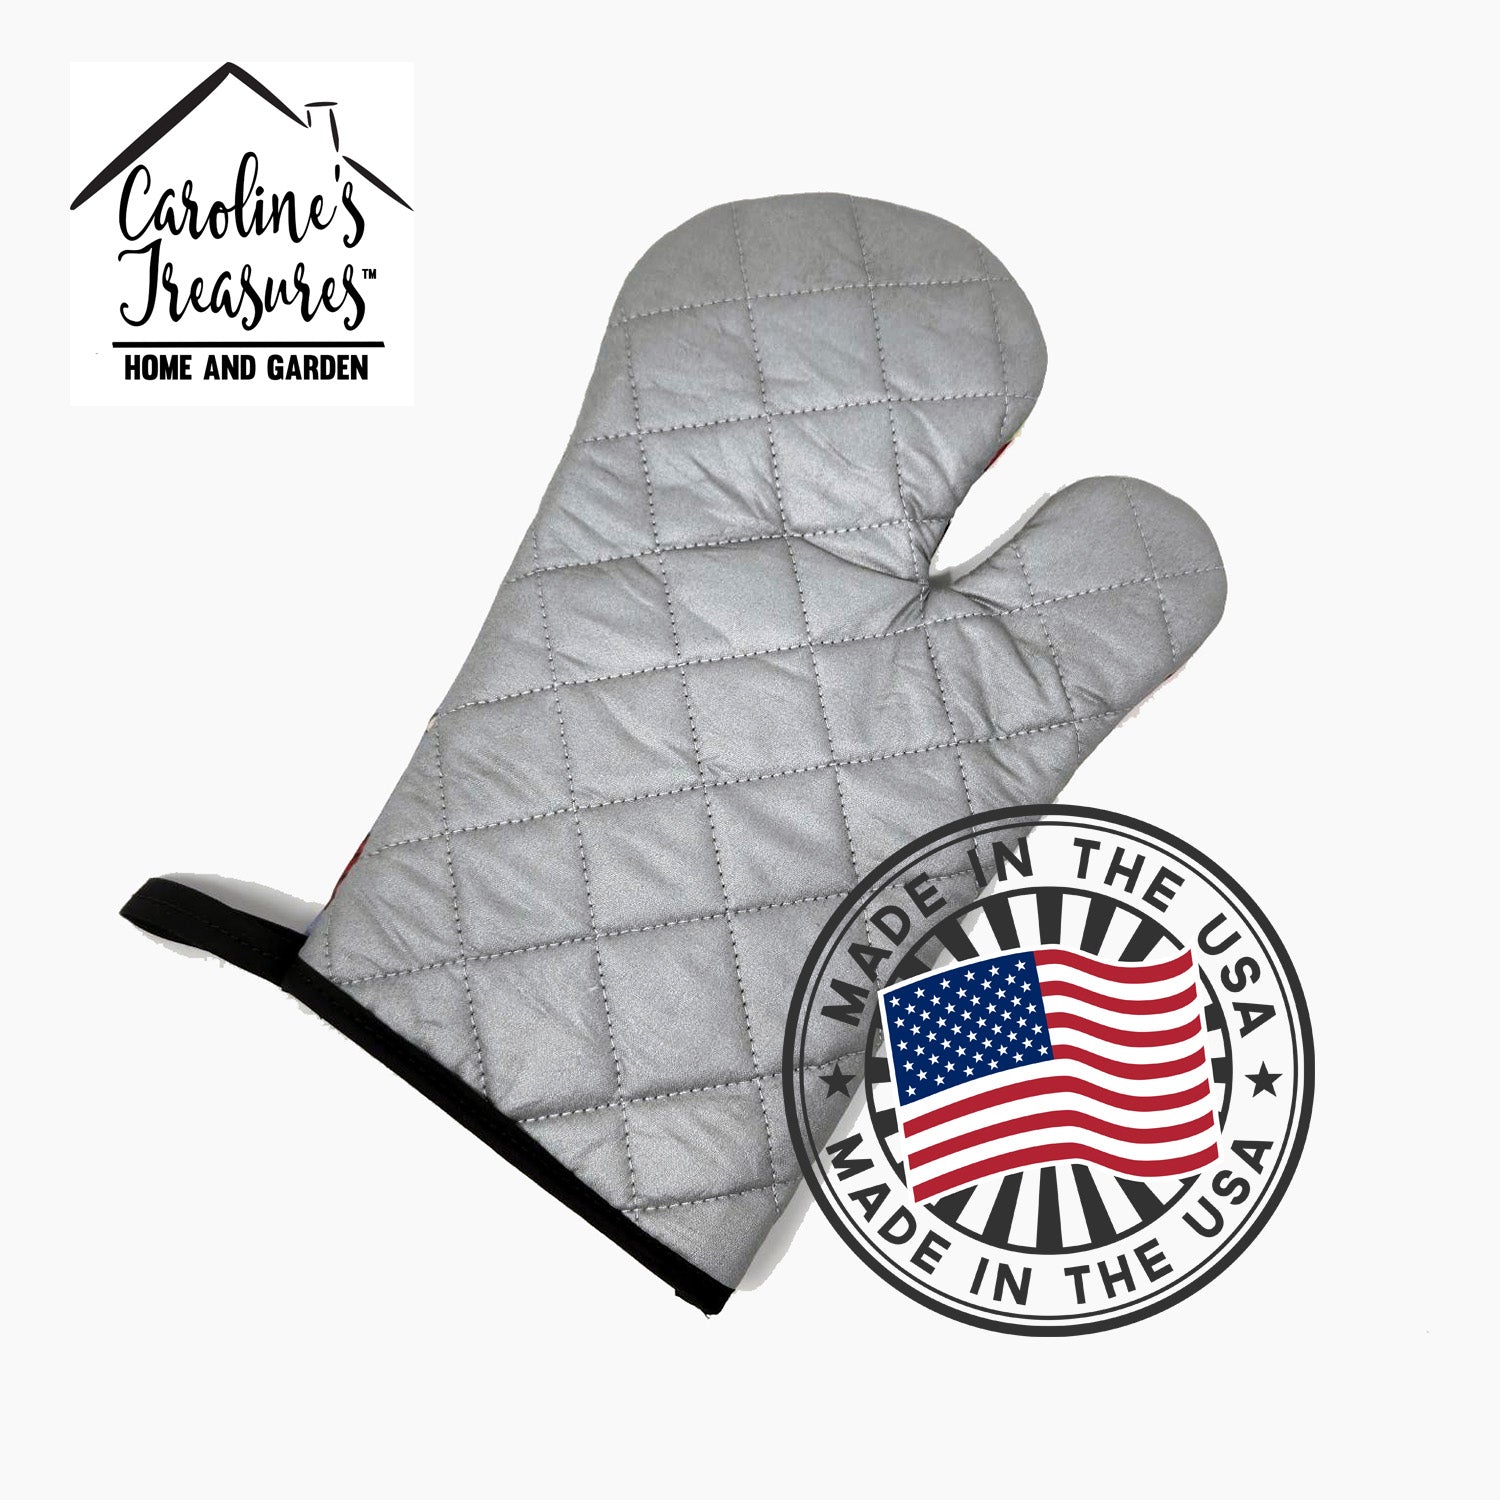 English Pointer Dog House Collection Oven Mitt BB3895OVMT